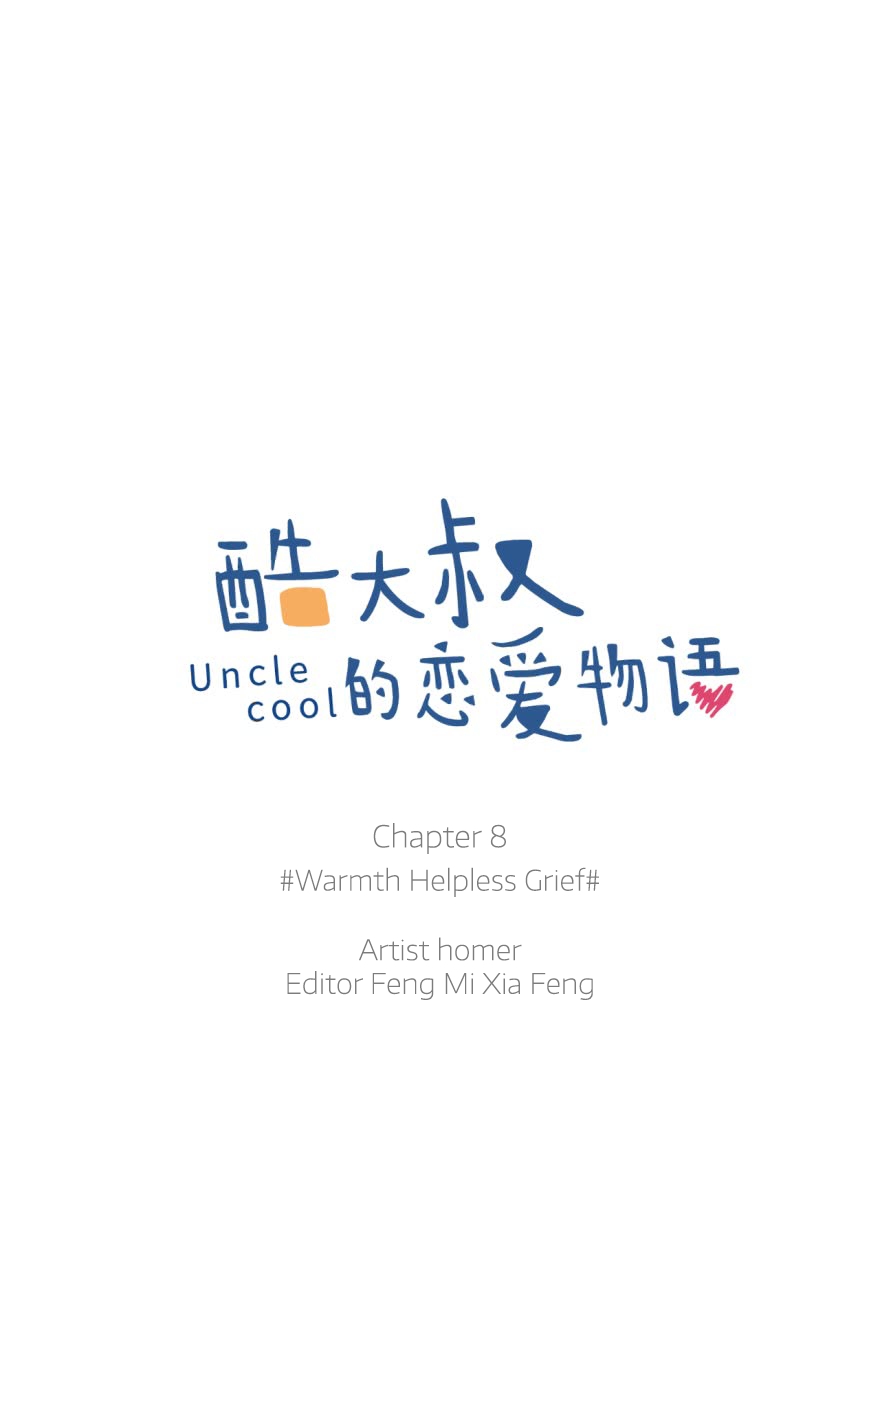 Uncle Cool Ch. 8